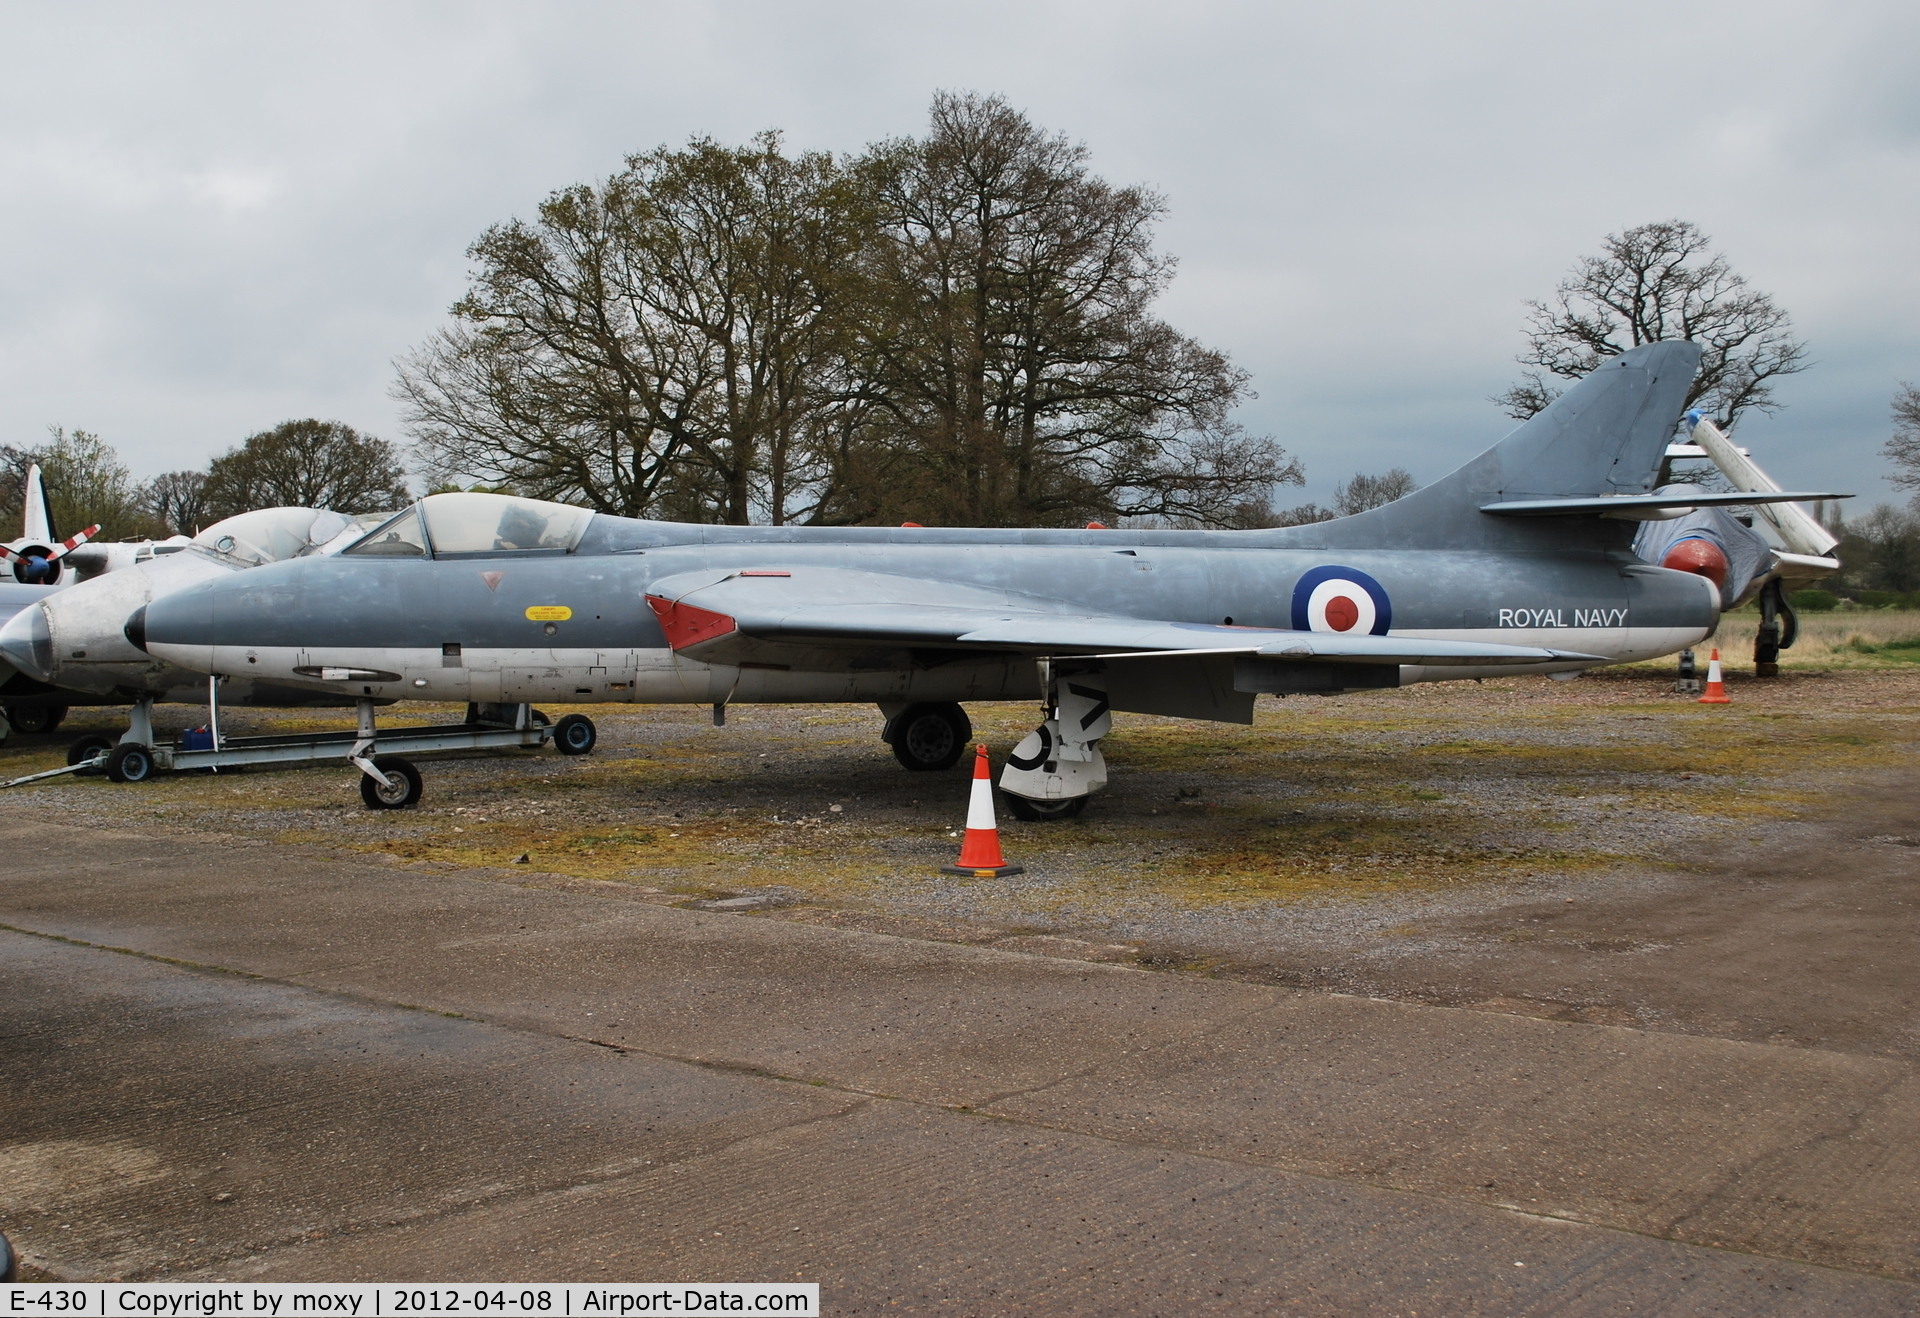 E-430, 1958 Hawker Hunter F.51 C/N 41H-680289, Hawker Hunter F.51 ex Danish AF. Port wing is from XF418 and starboard wing from XG226.
at the Gatwick Aviation Museum.